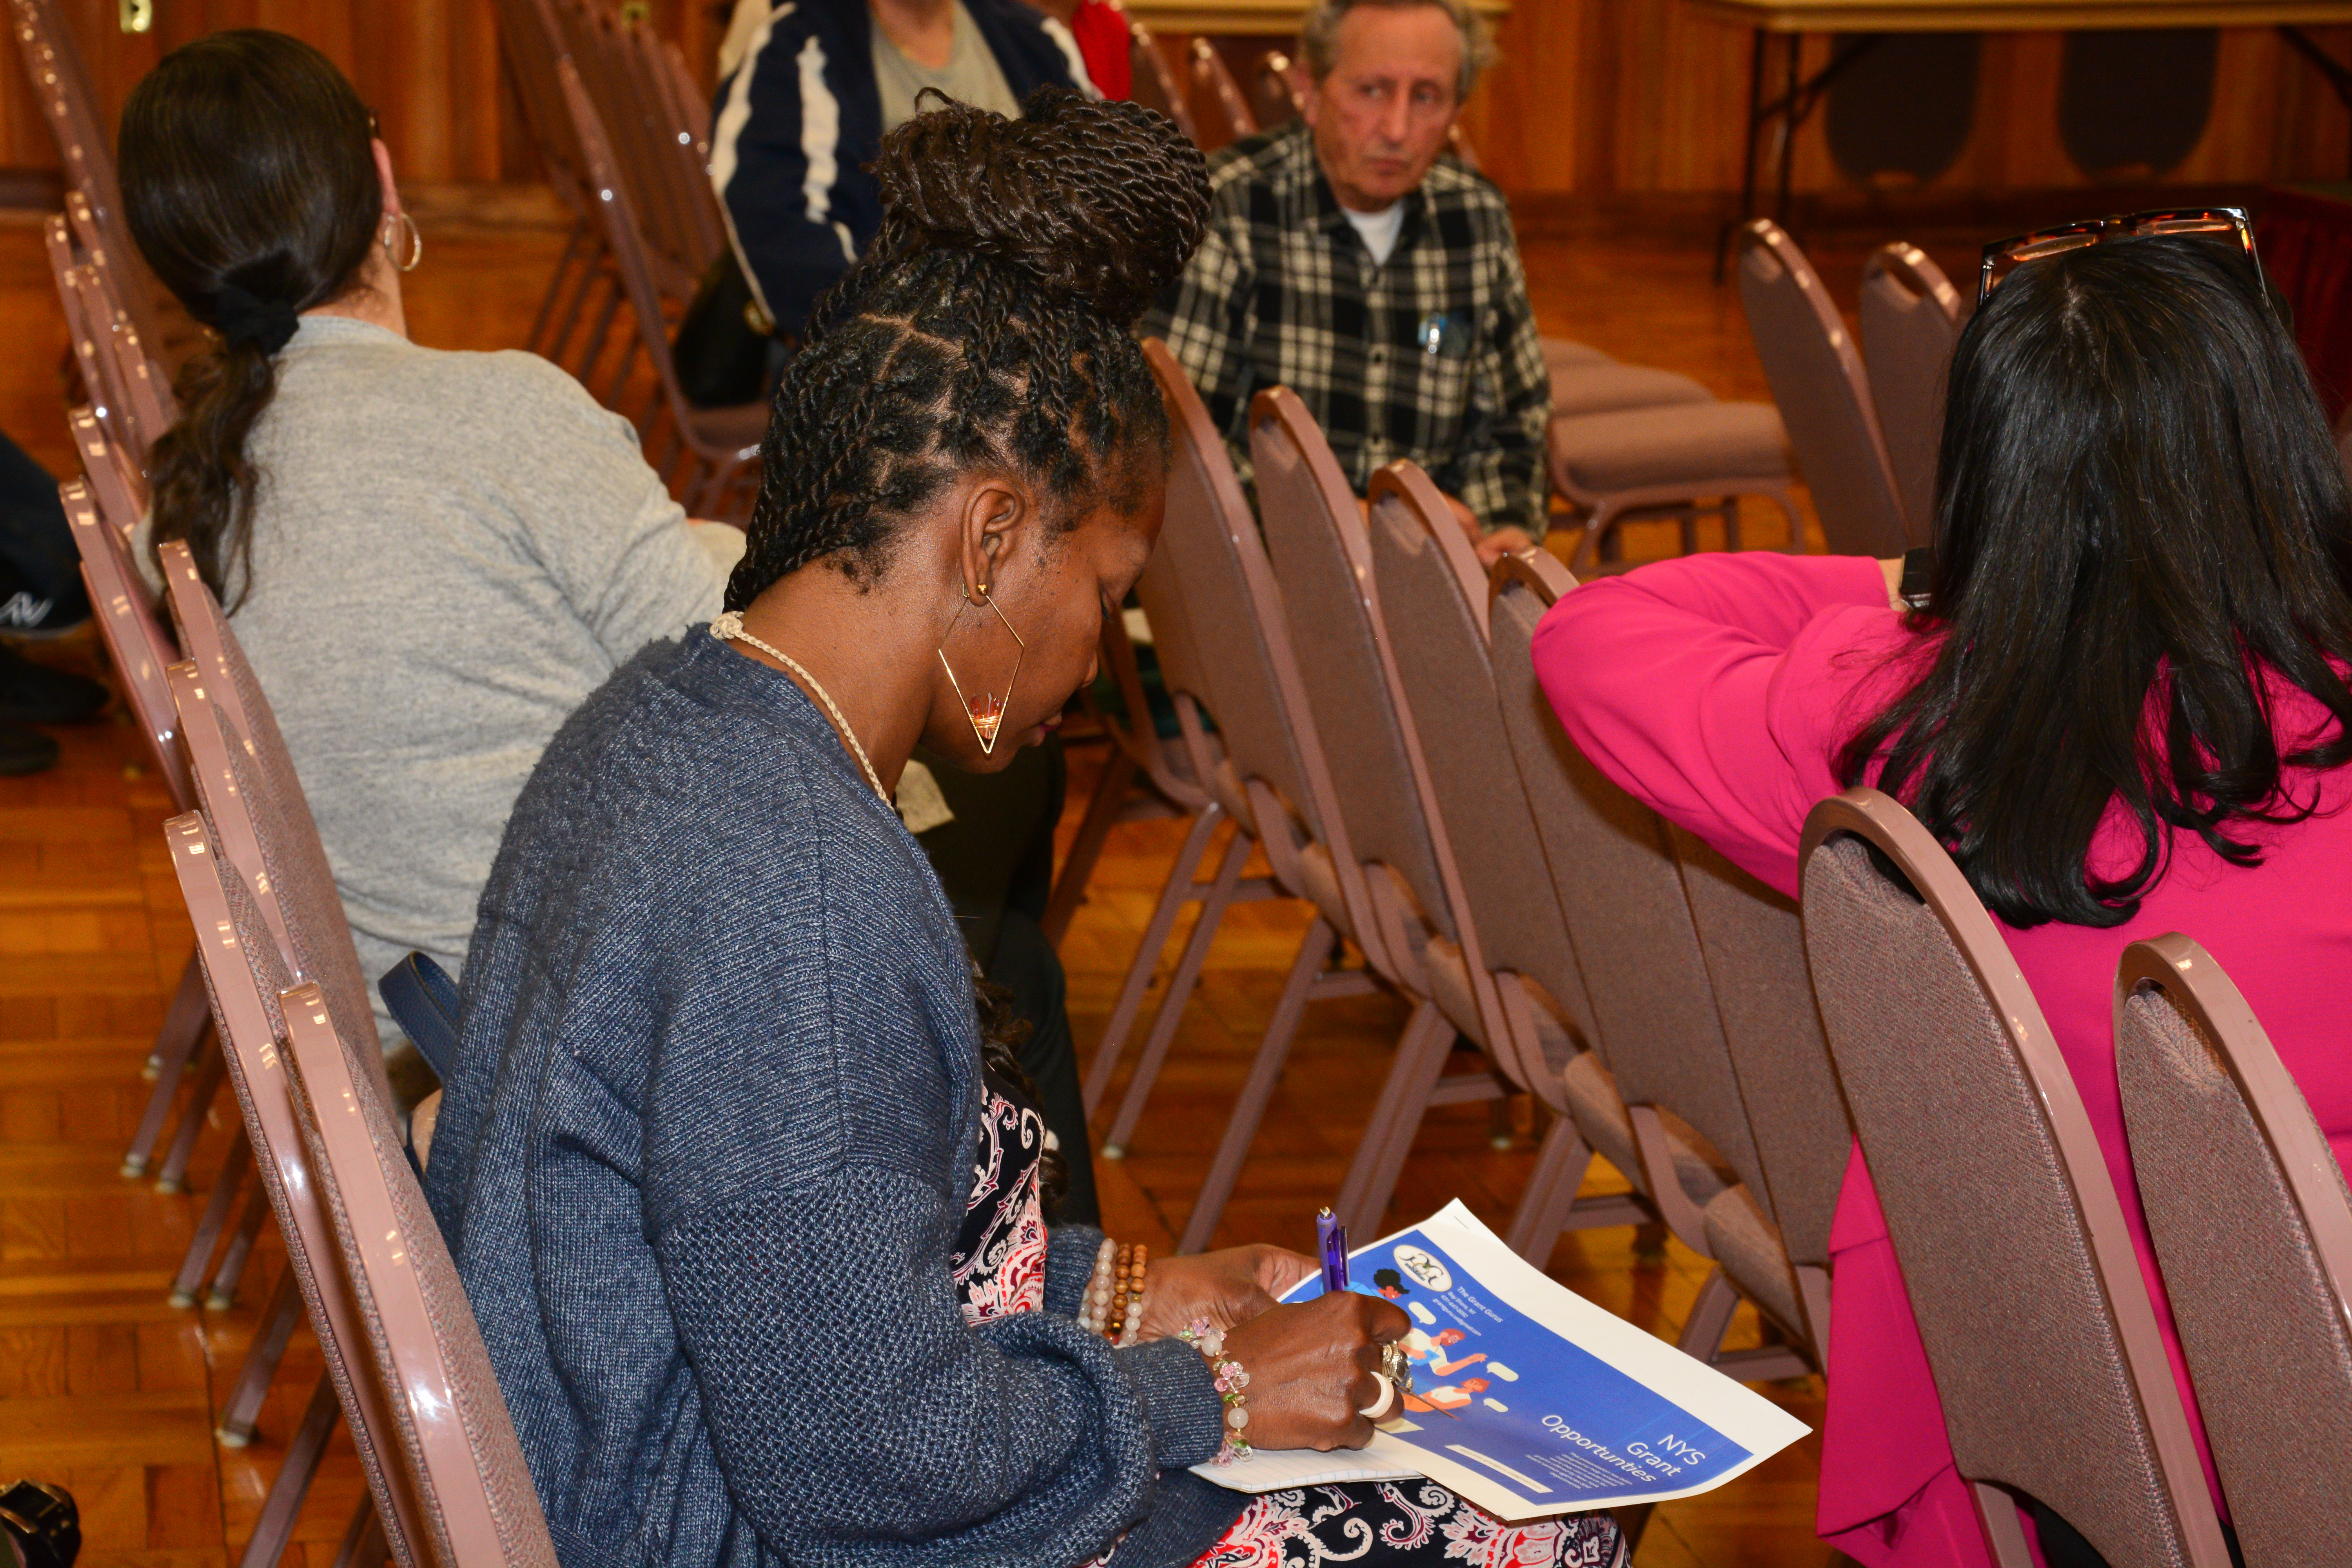 Participants of a grant writing workshop sponsored by NYS Senator Monica R. Martinez receive information about the state grant process.